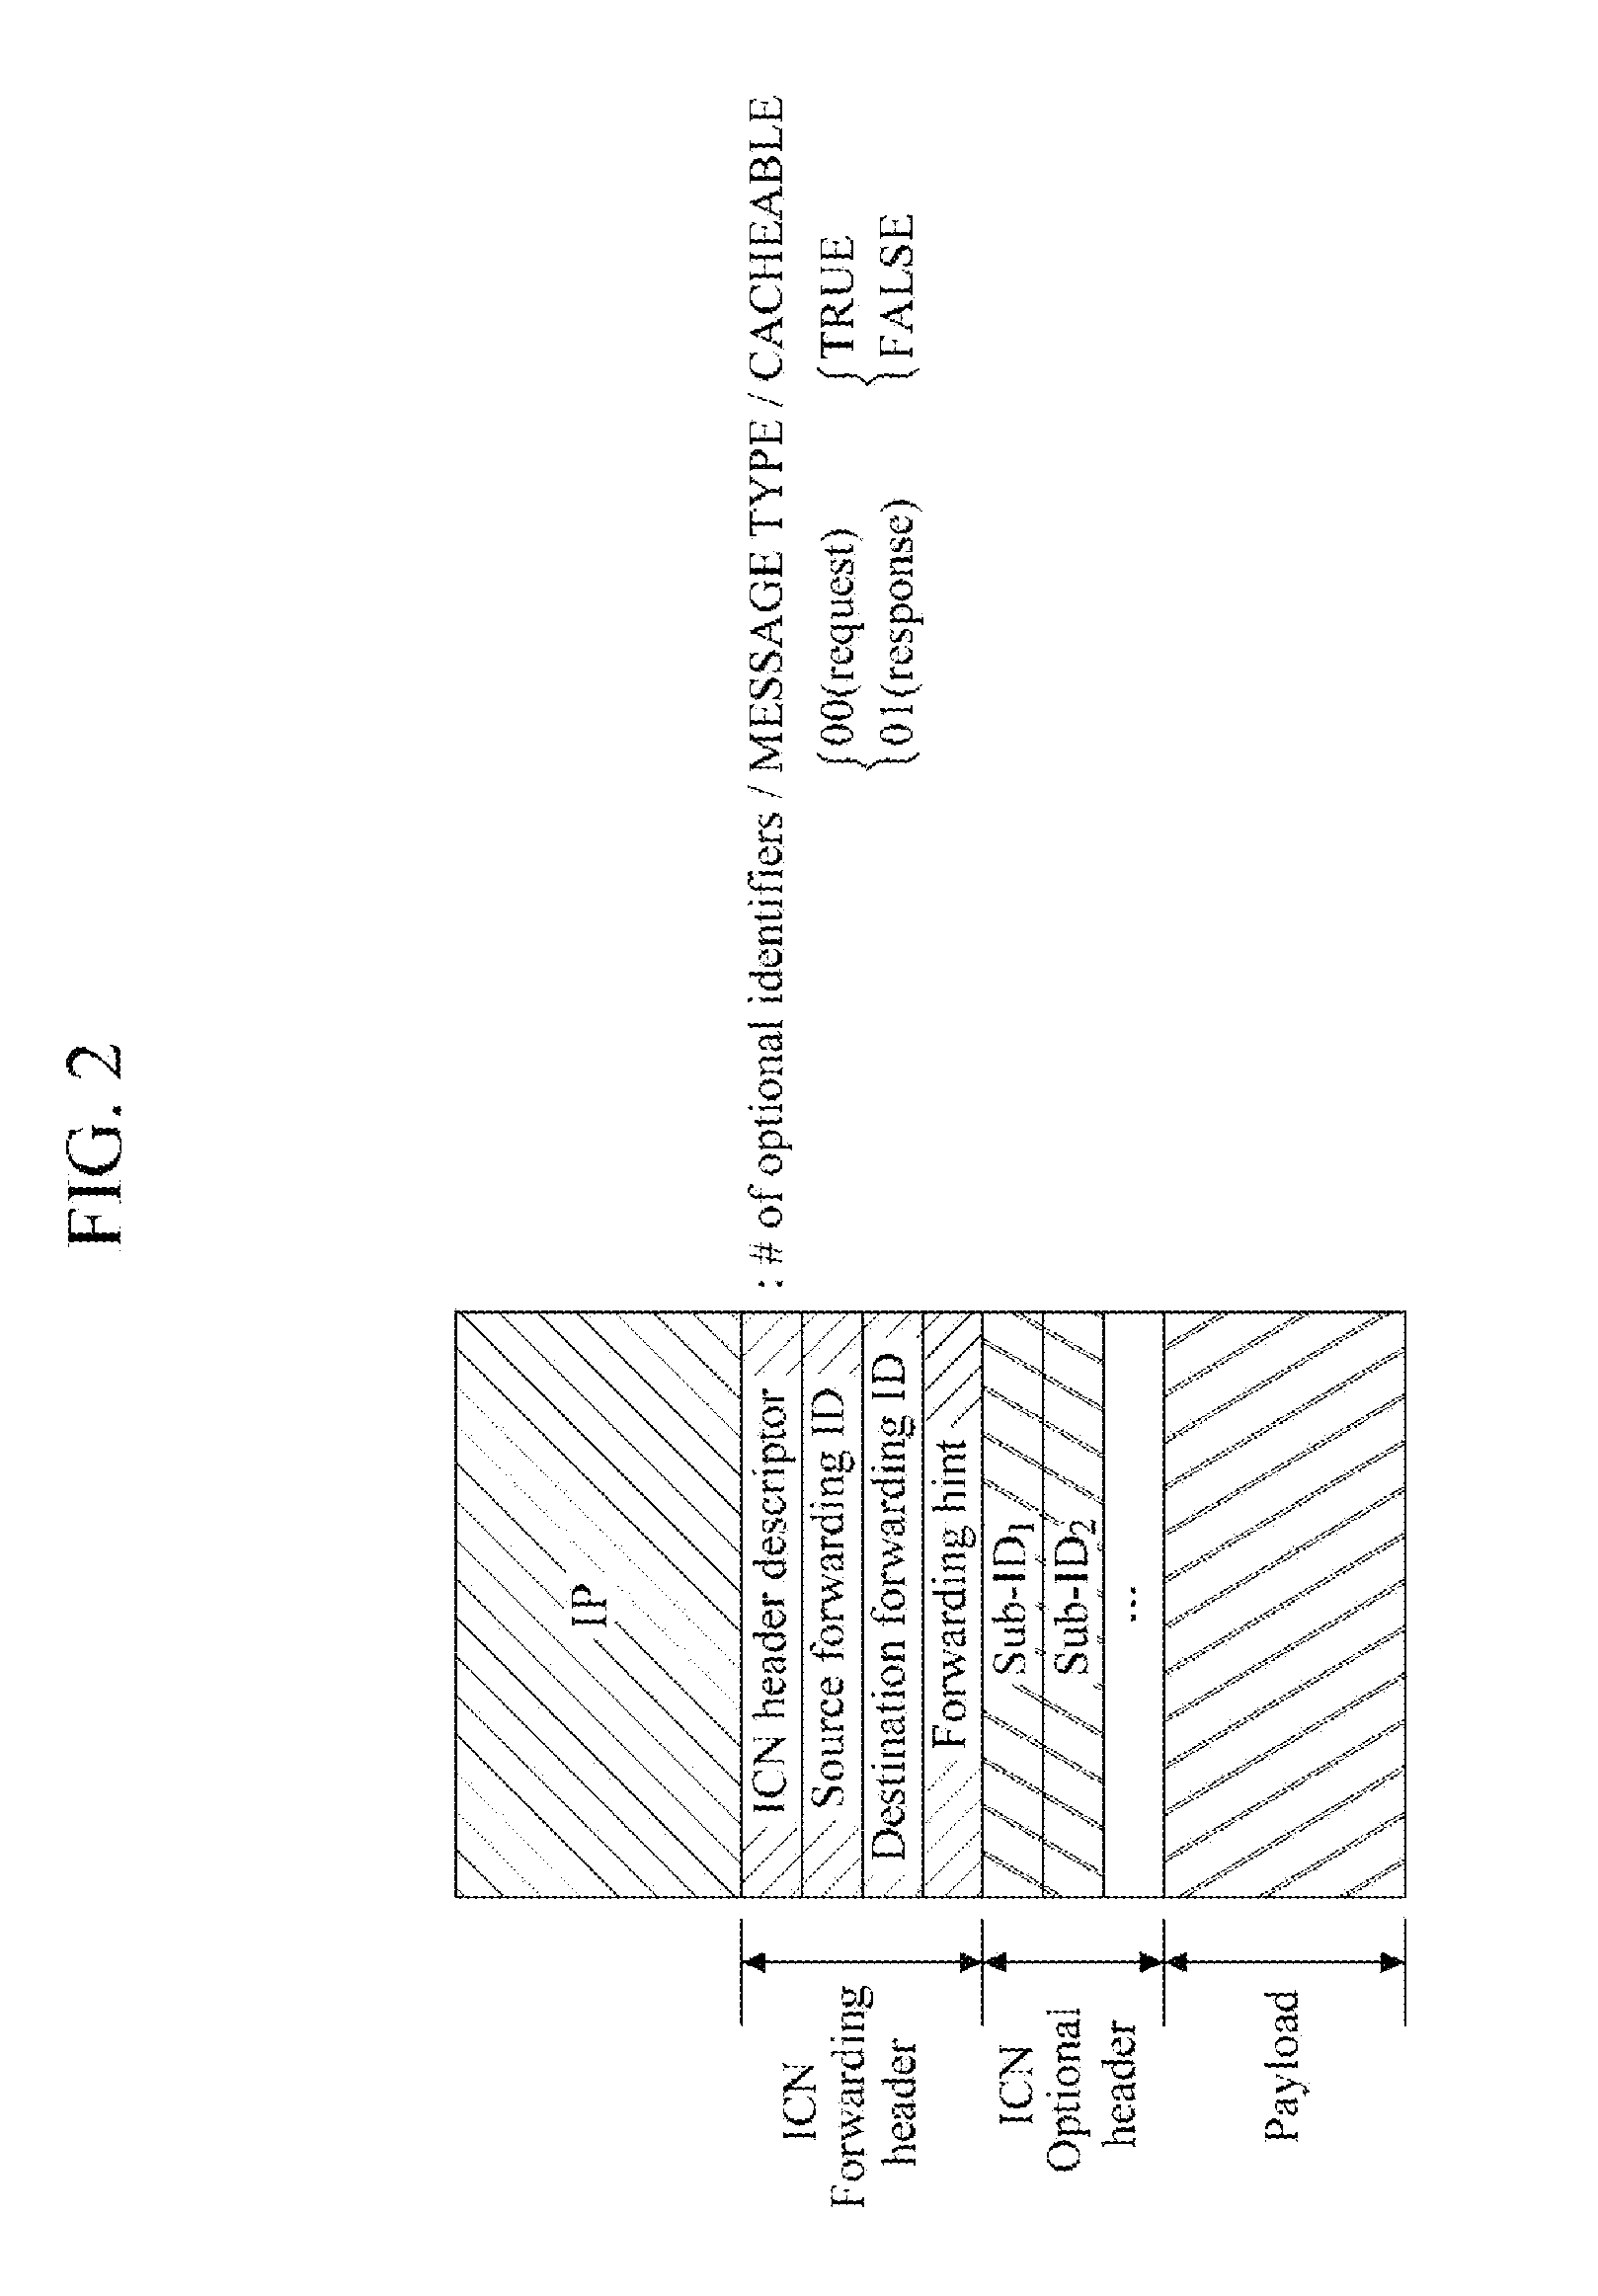 Packet processing device for ip-based information-centric network